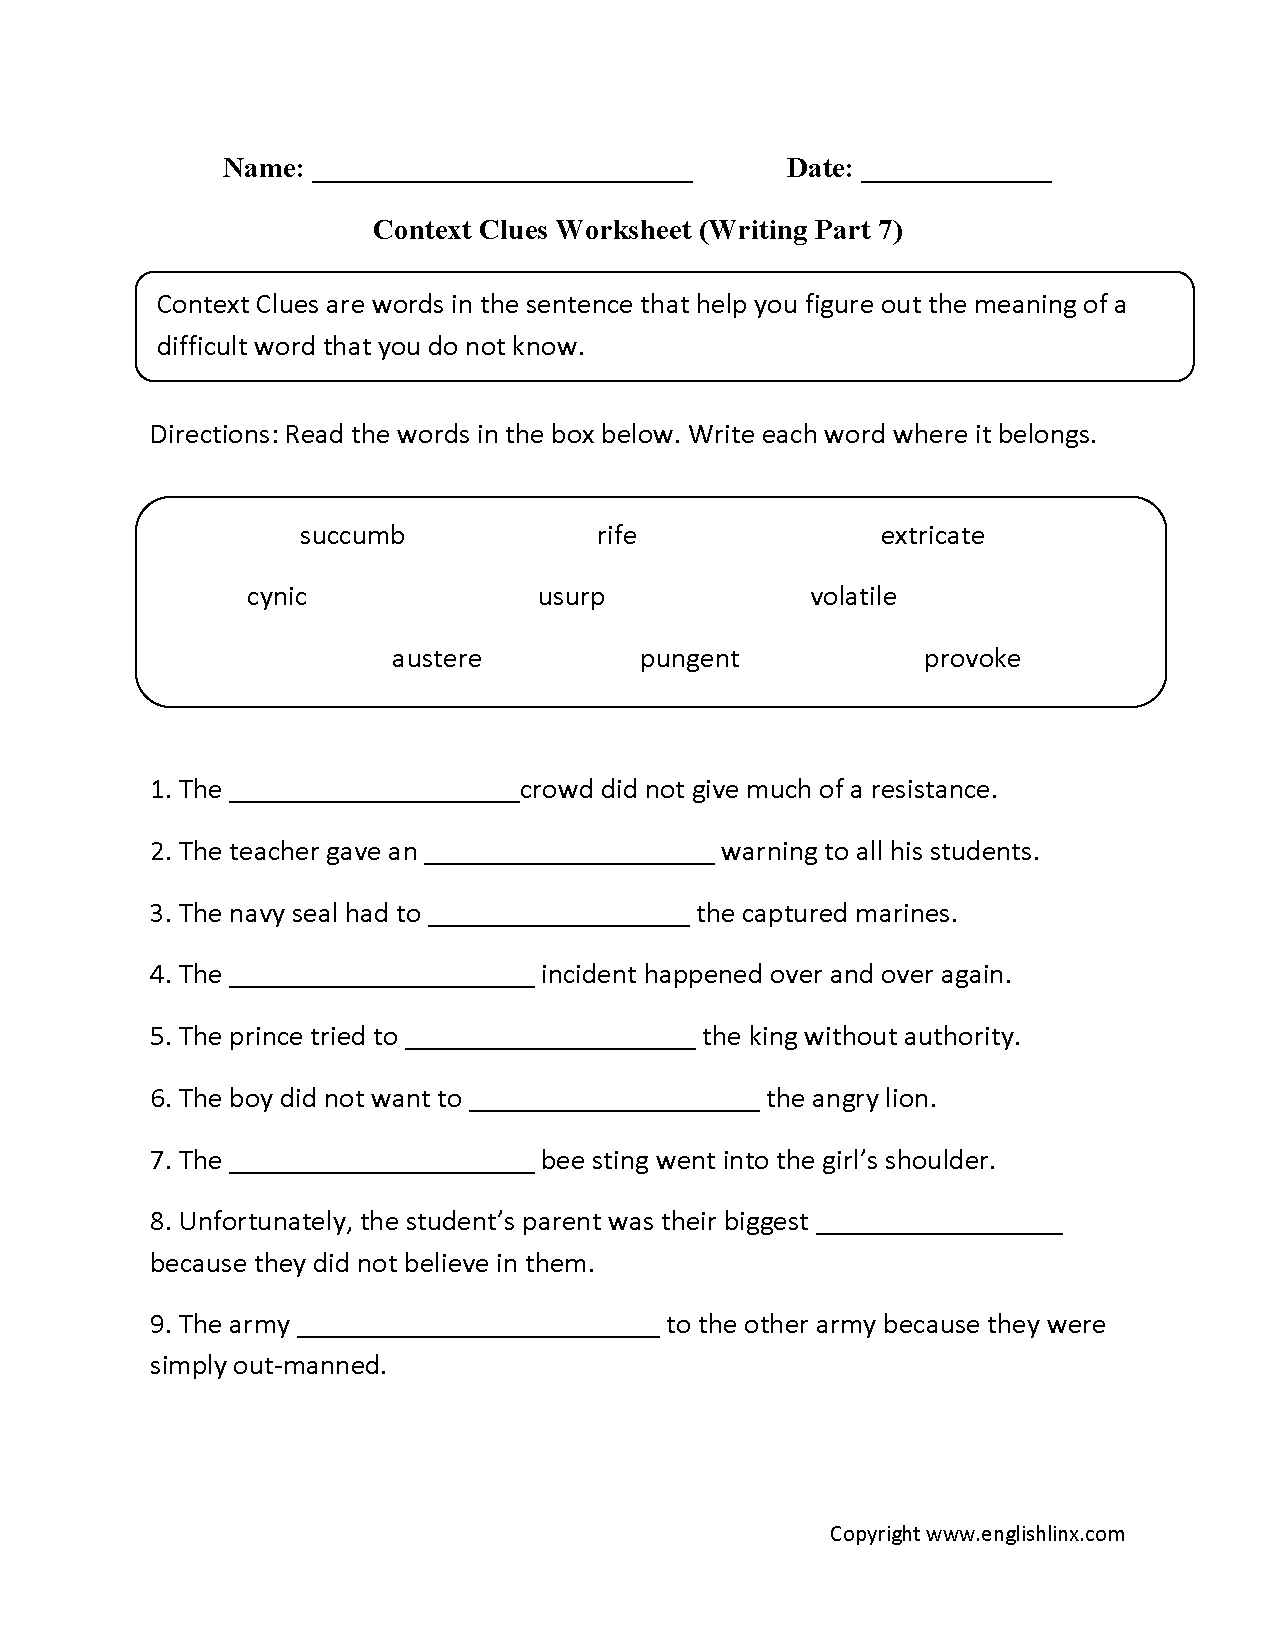 Context Clues Worksheets Writing Part 7 Advanced